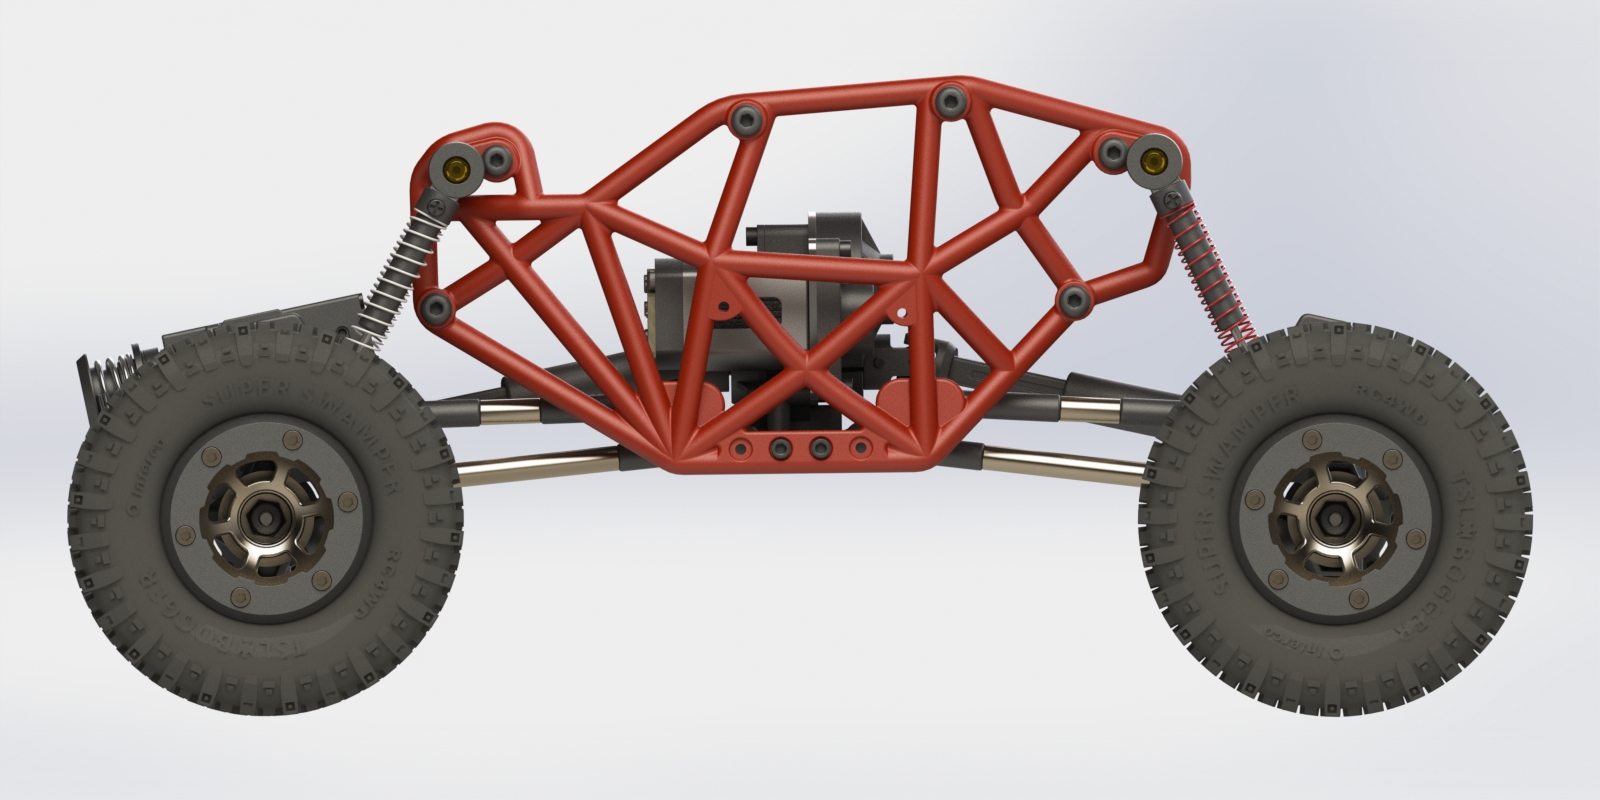 3D-Printed R1 Crawler Chassis.